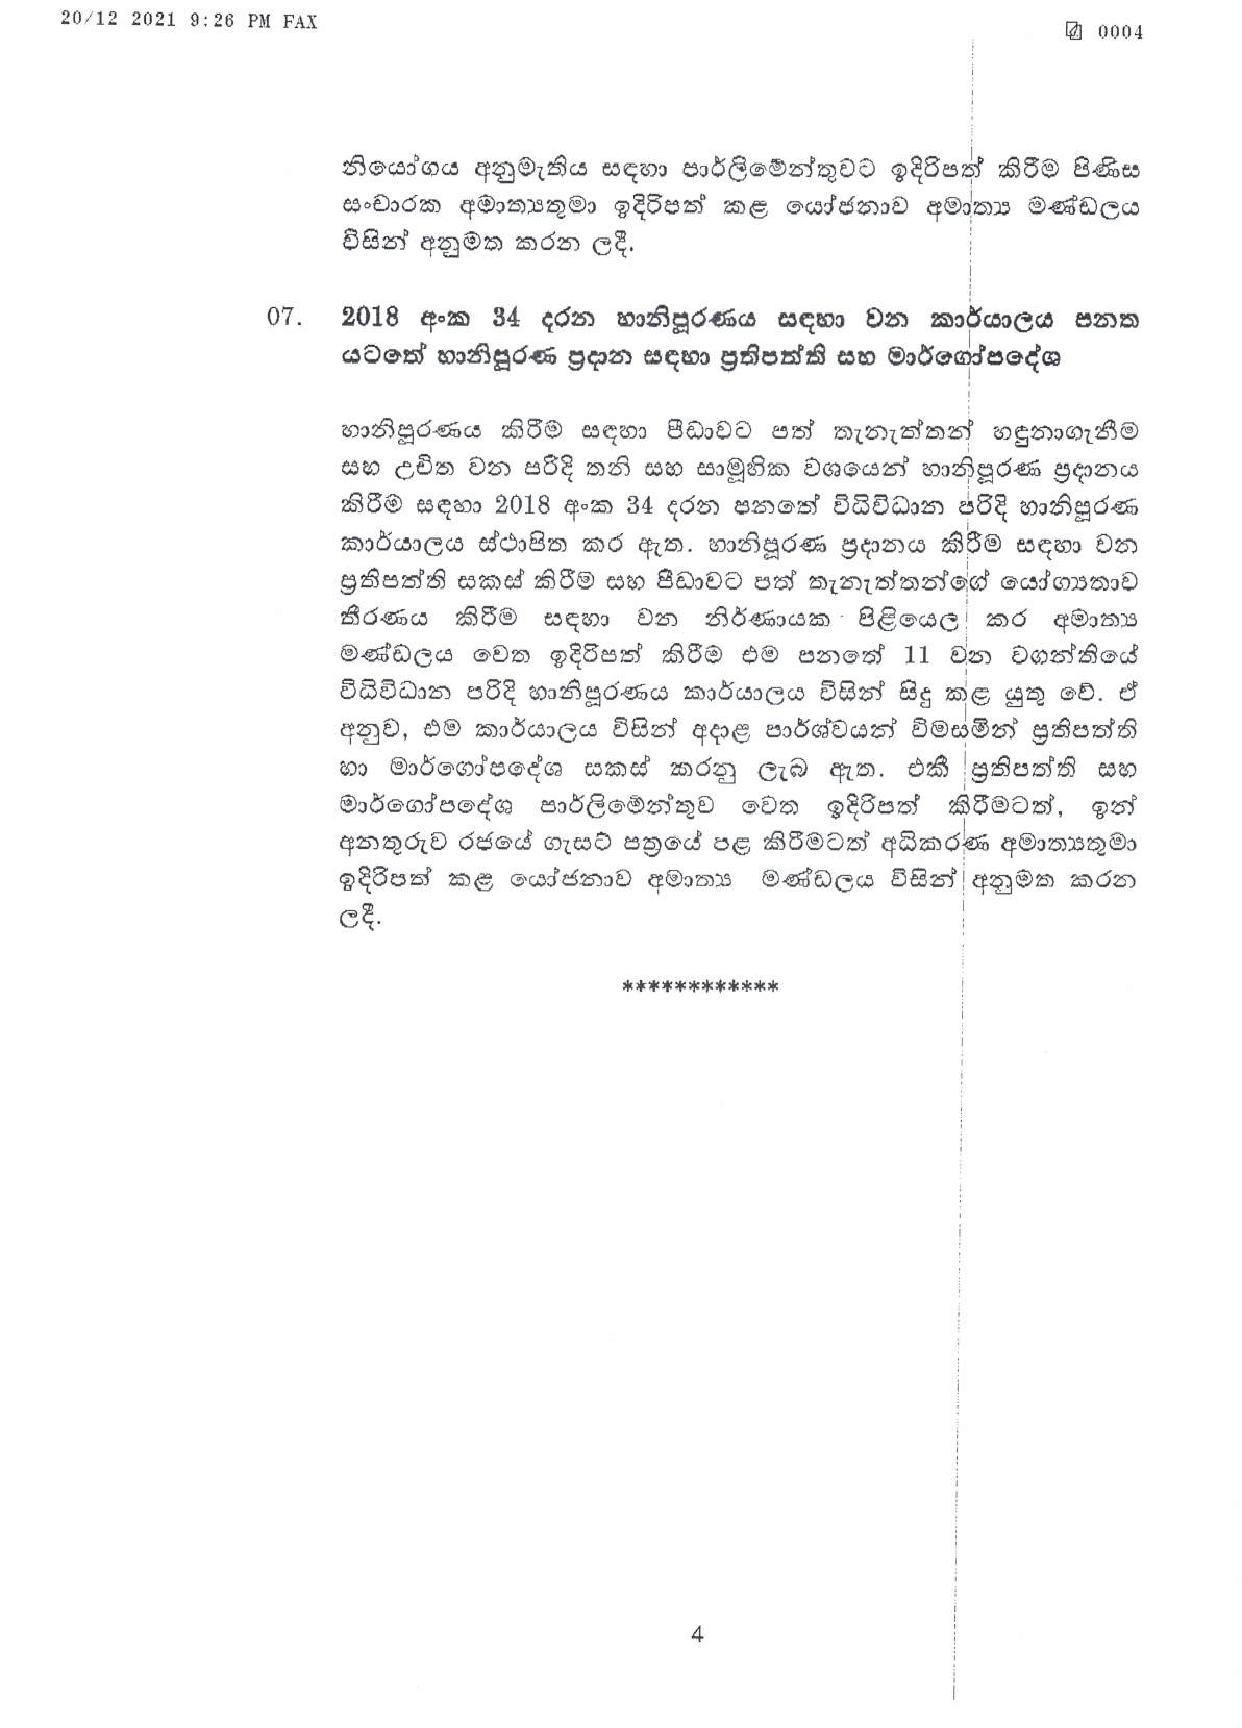 Cabinet Decisions on 20.12.2021 page 001